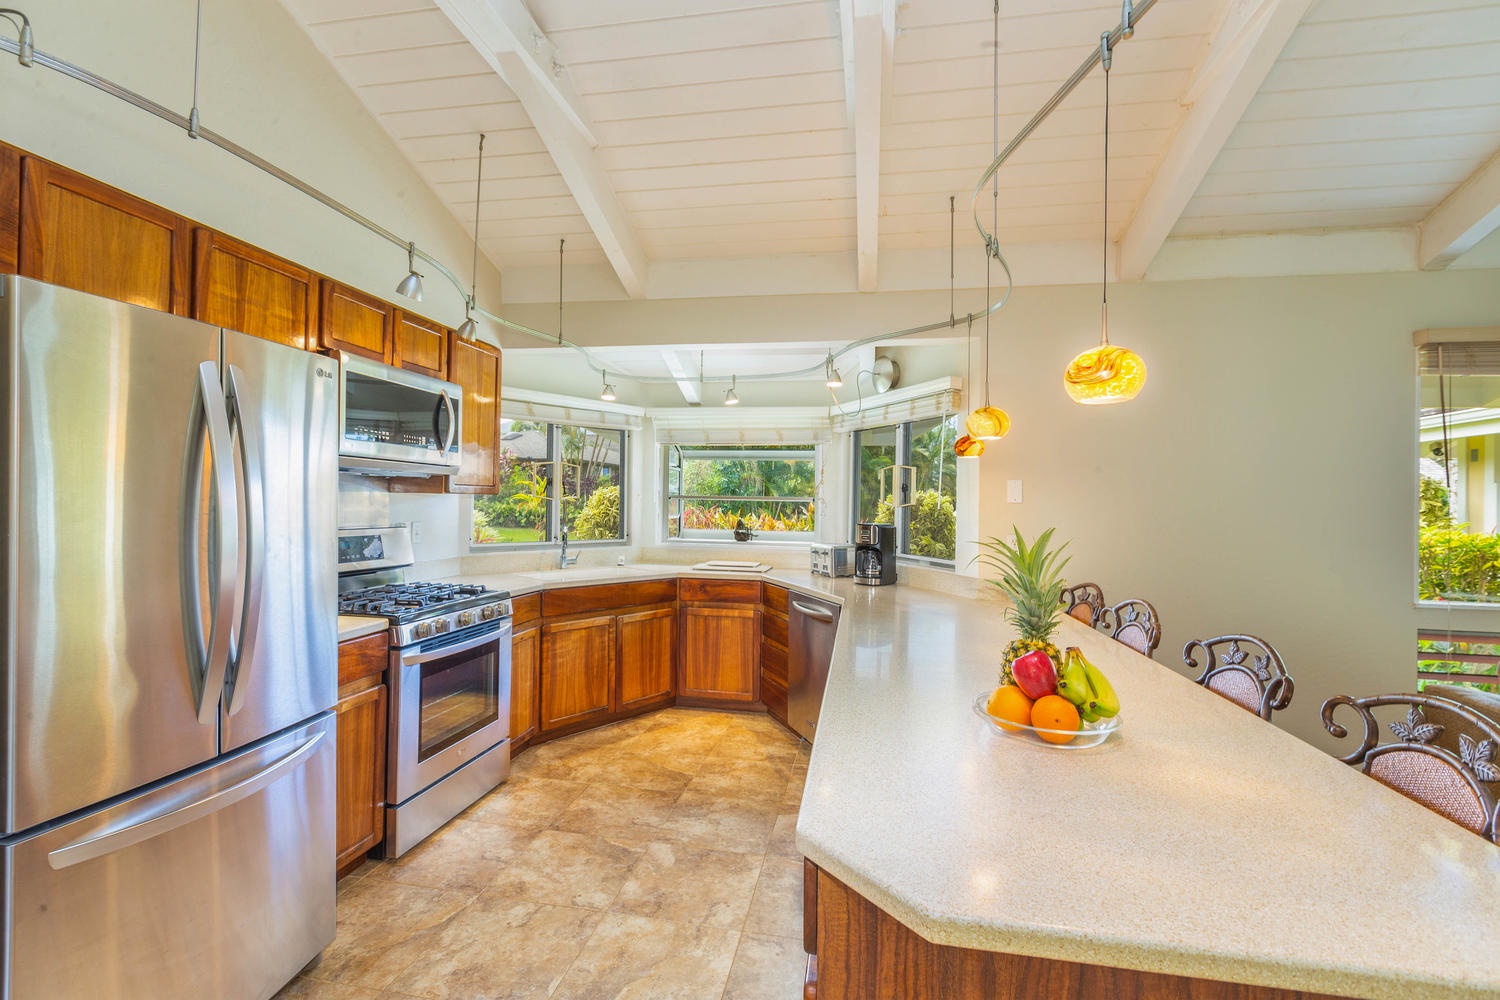 Princeville Vacation Rentals, Mala Hale - Upgraded kitchen with high-quality appliances